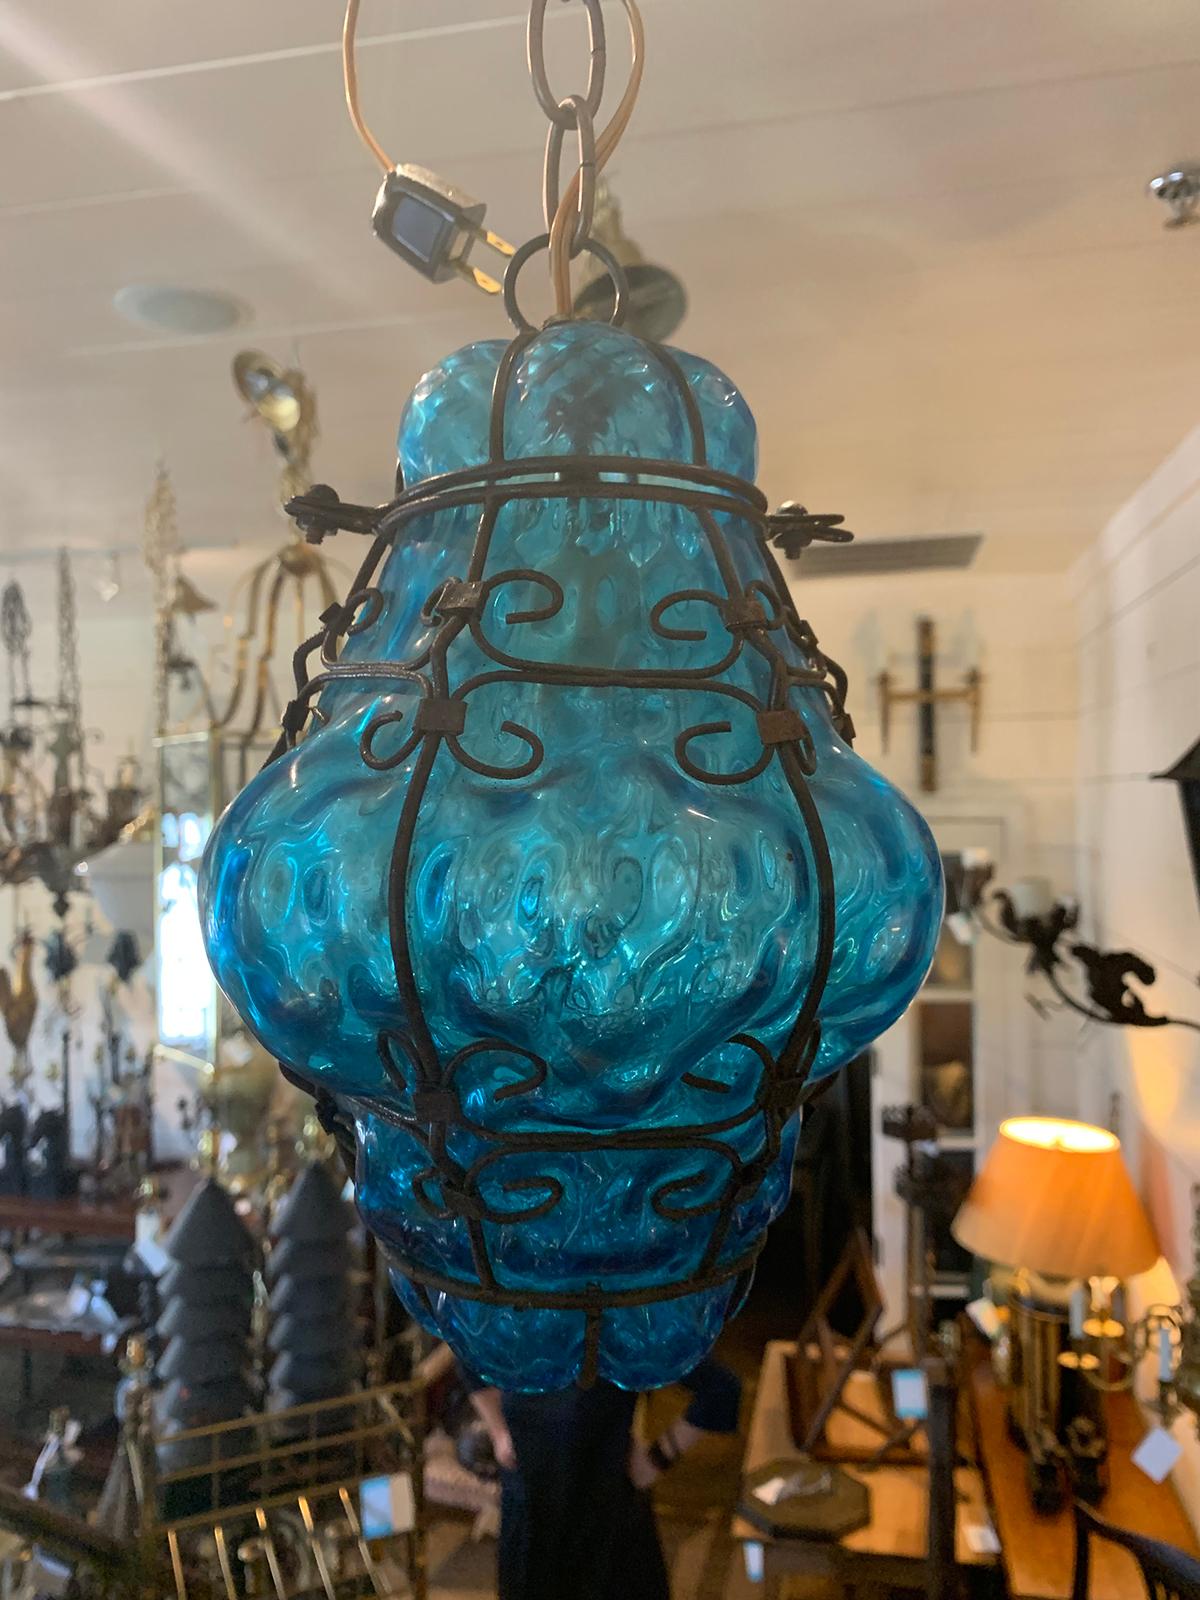 Early 20th century blue glass and steel hand blown bubble glass lantern
New wiring.